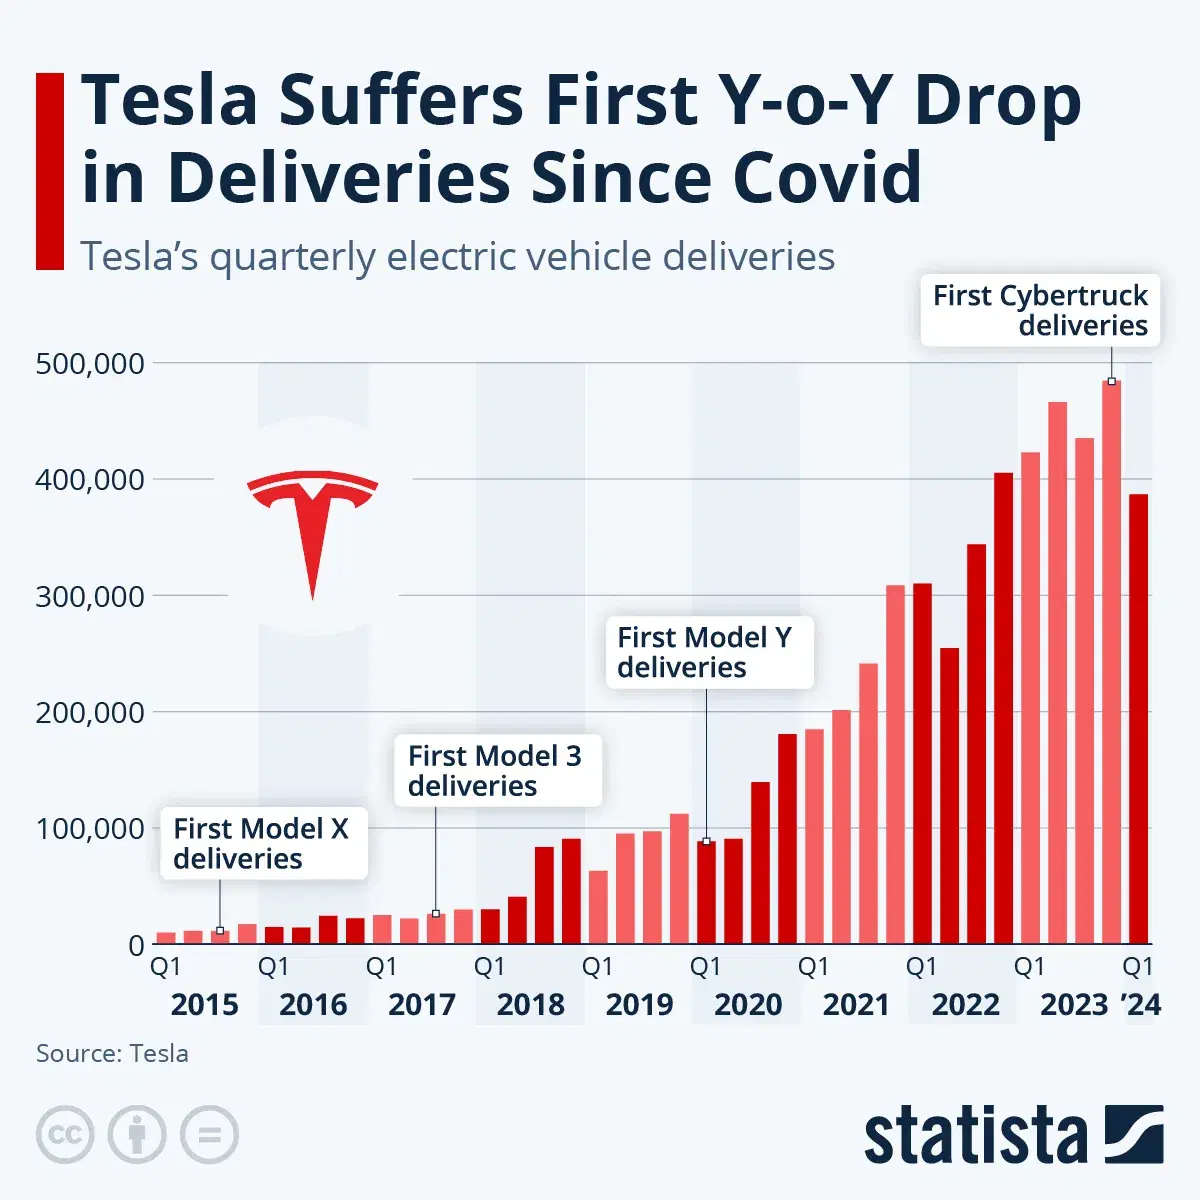 Tesla Suffers First Year-Over-Year Drop in Deliveries Since Covid